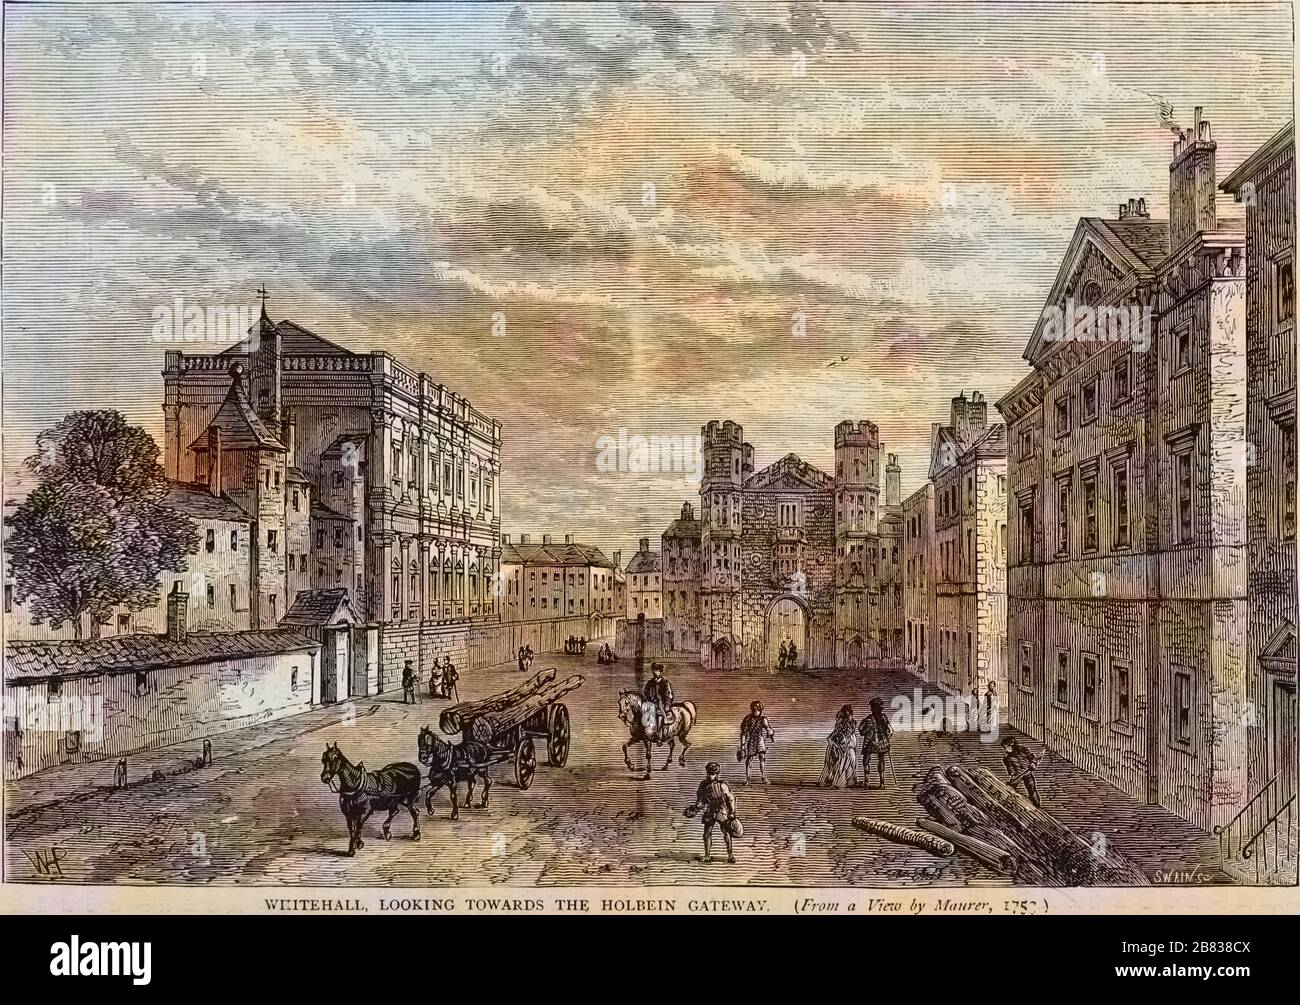 Engraving of the Whitehall, looking towards Holbein Gateway, London, England, from the book 'Old and new London: a narrative of its history, its people, and its places' by Thornbury Walter, 1873. Courtesy Internet Archive. Note: Image has been digitally colorized using a modern process. Colors may not be period-accurate. () Stock Photo